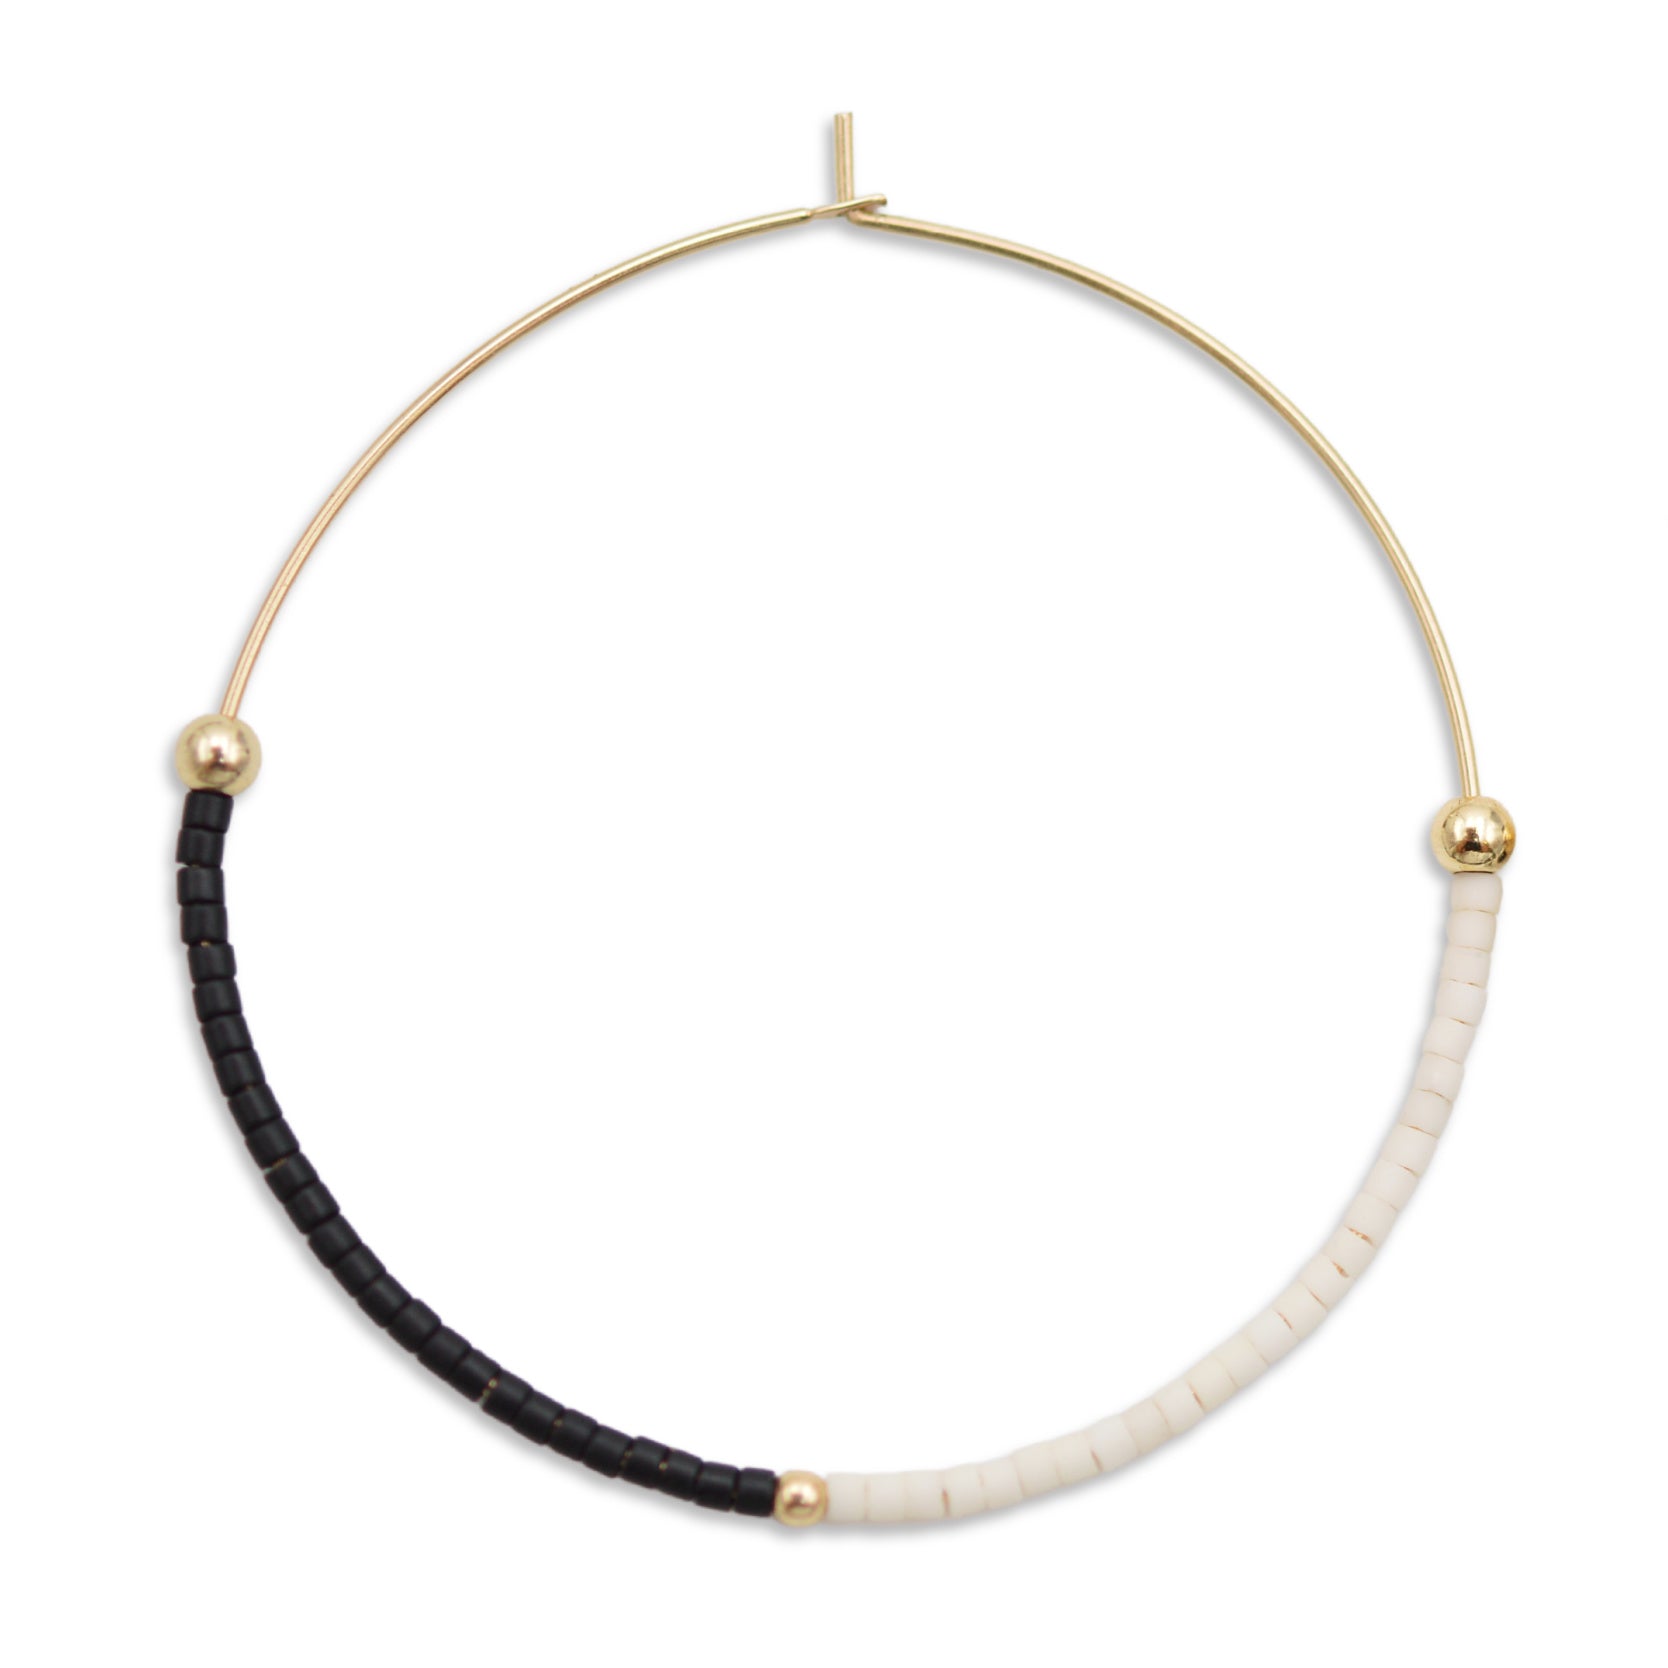 Black and White gold filled hoops